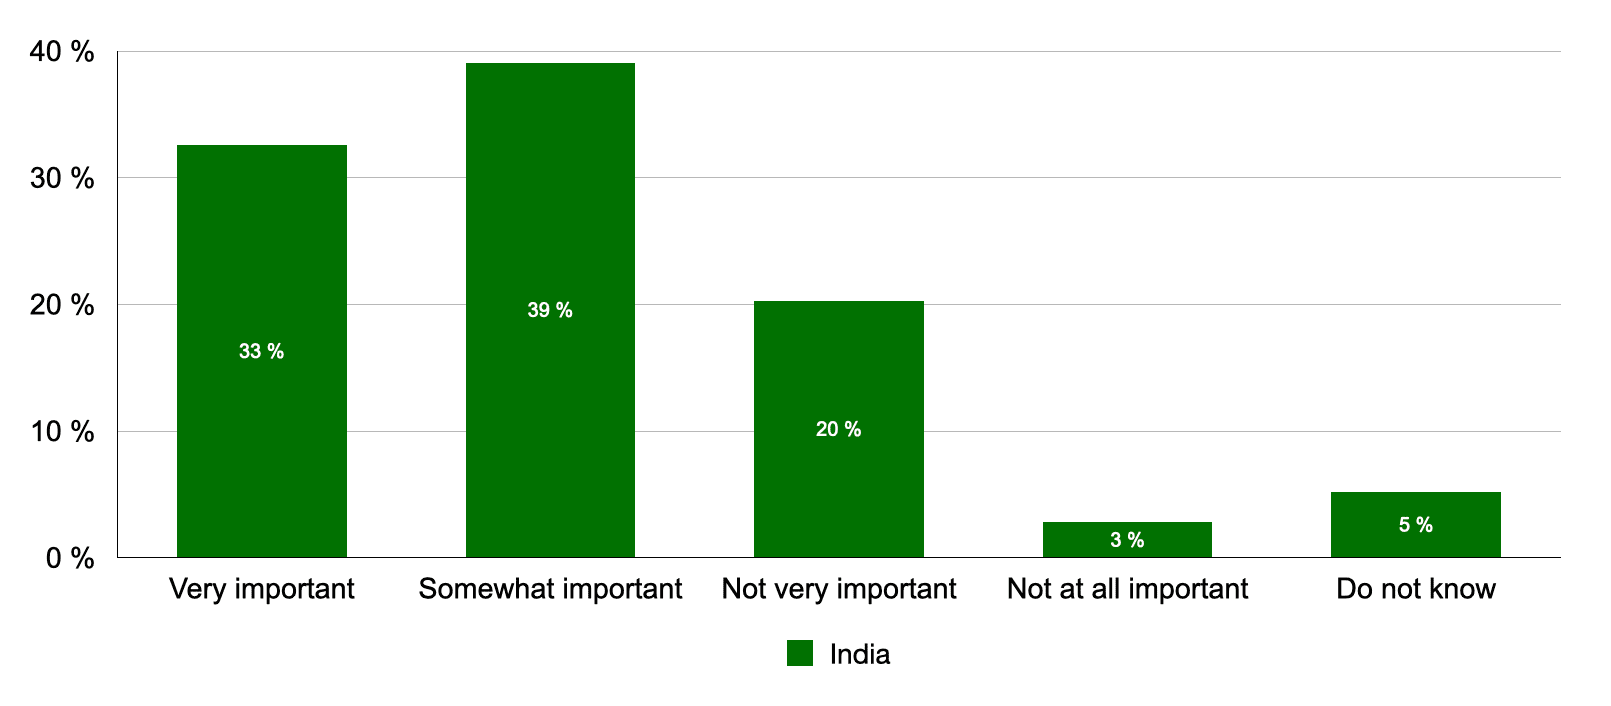 Very important: 33%,  Somewhat important: 39%, Not very important: 20%, Not at all important: 3%, Don't know: 5%